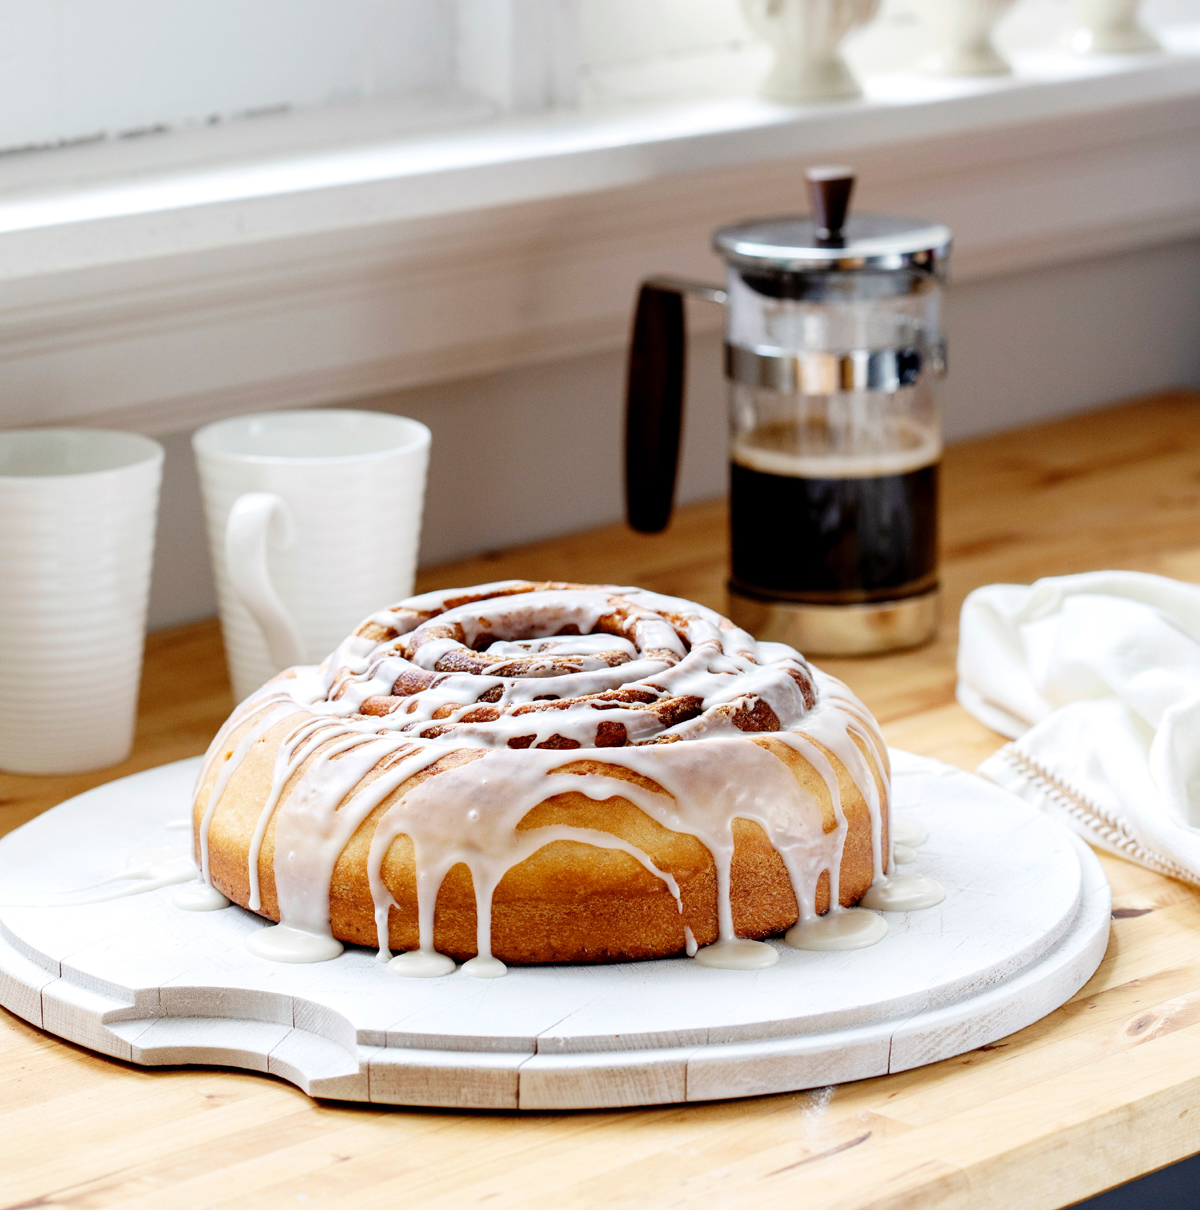 Cozy Up Your Kitchen with This Giant Cinnamon Bun Recipe